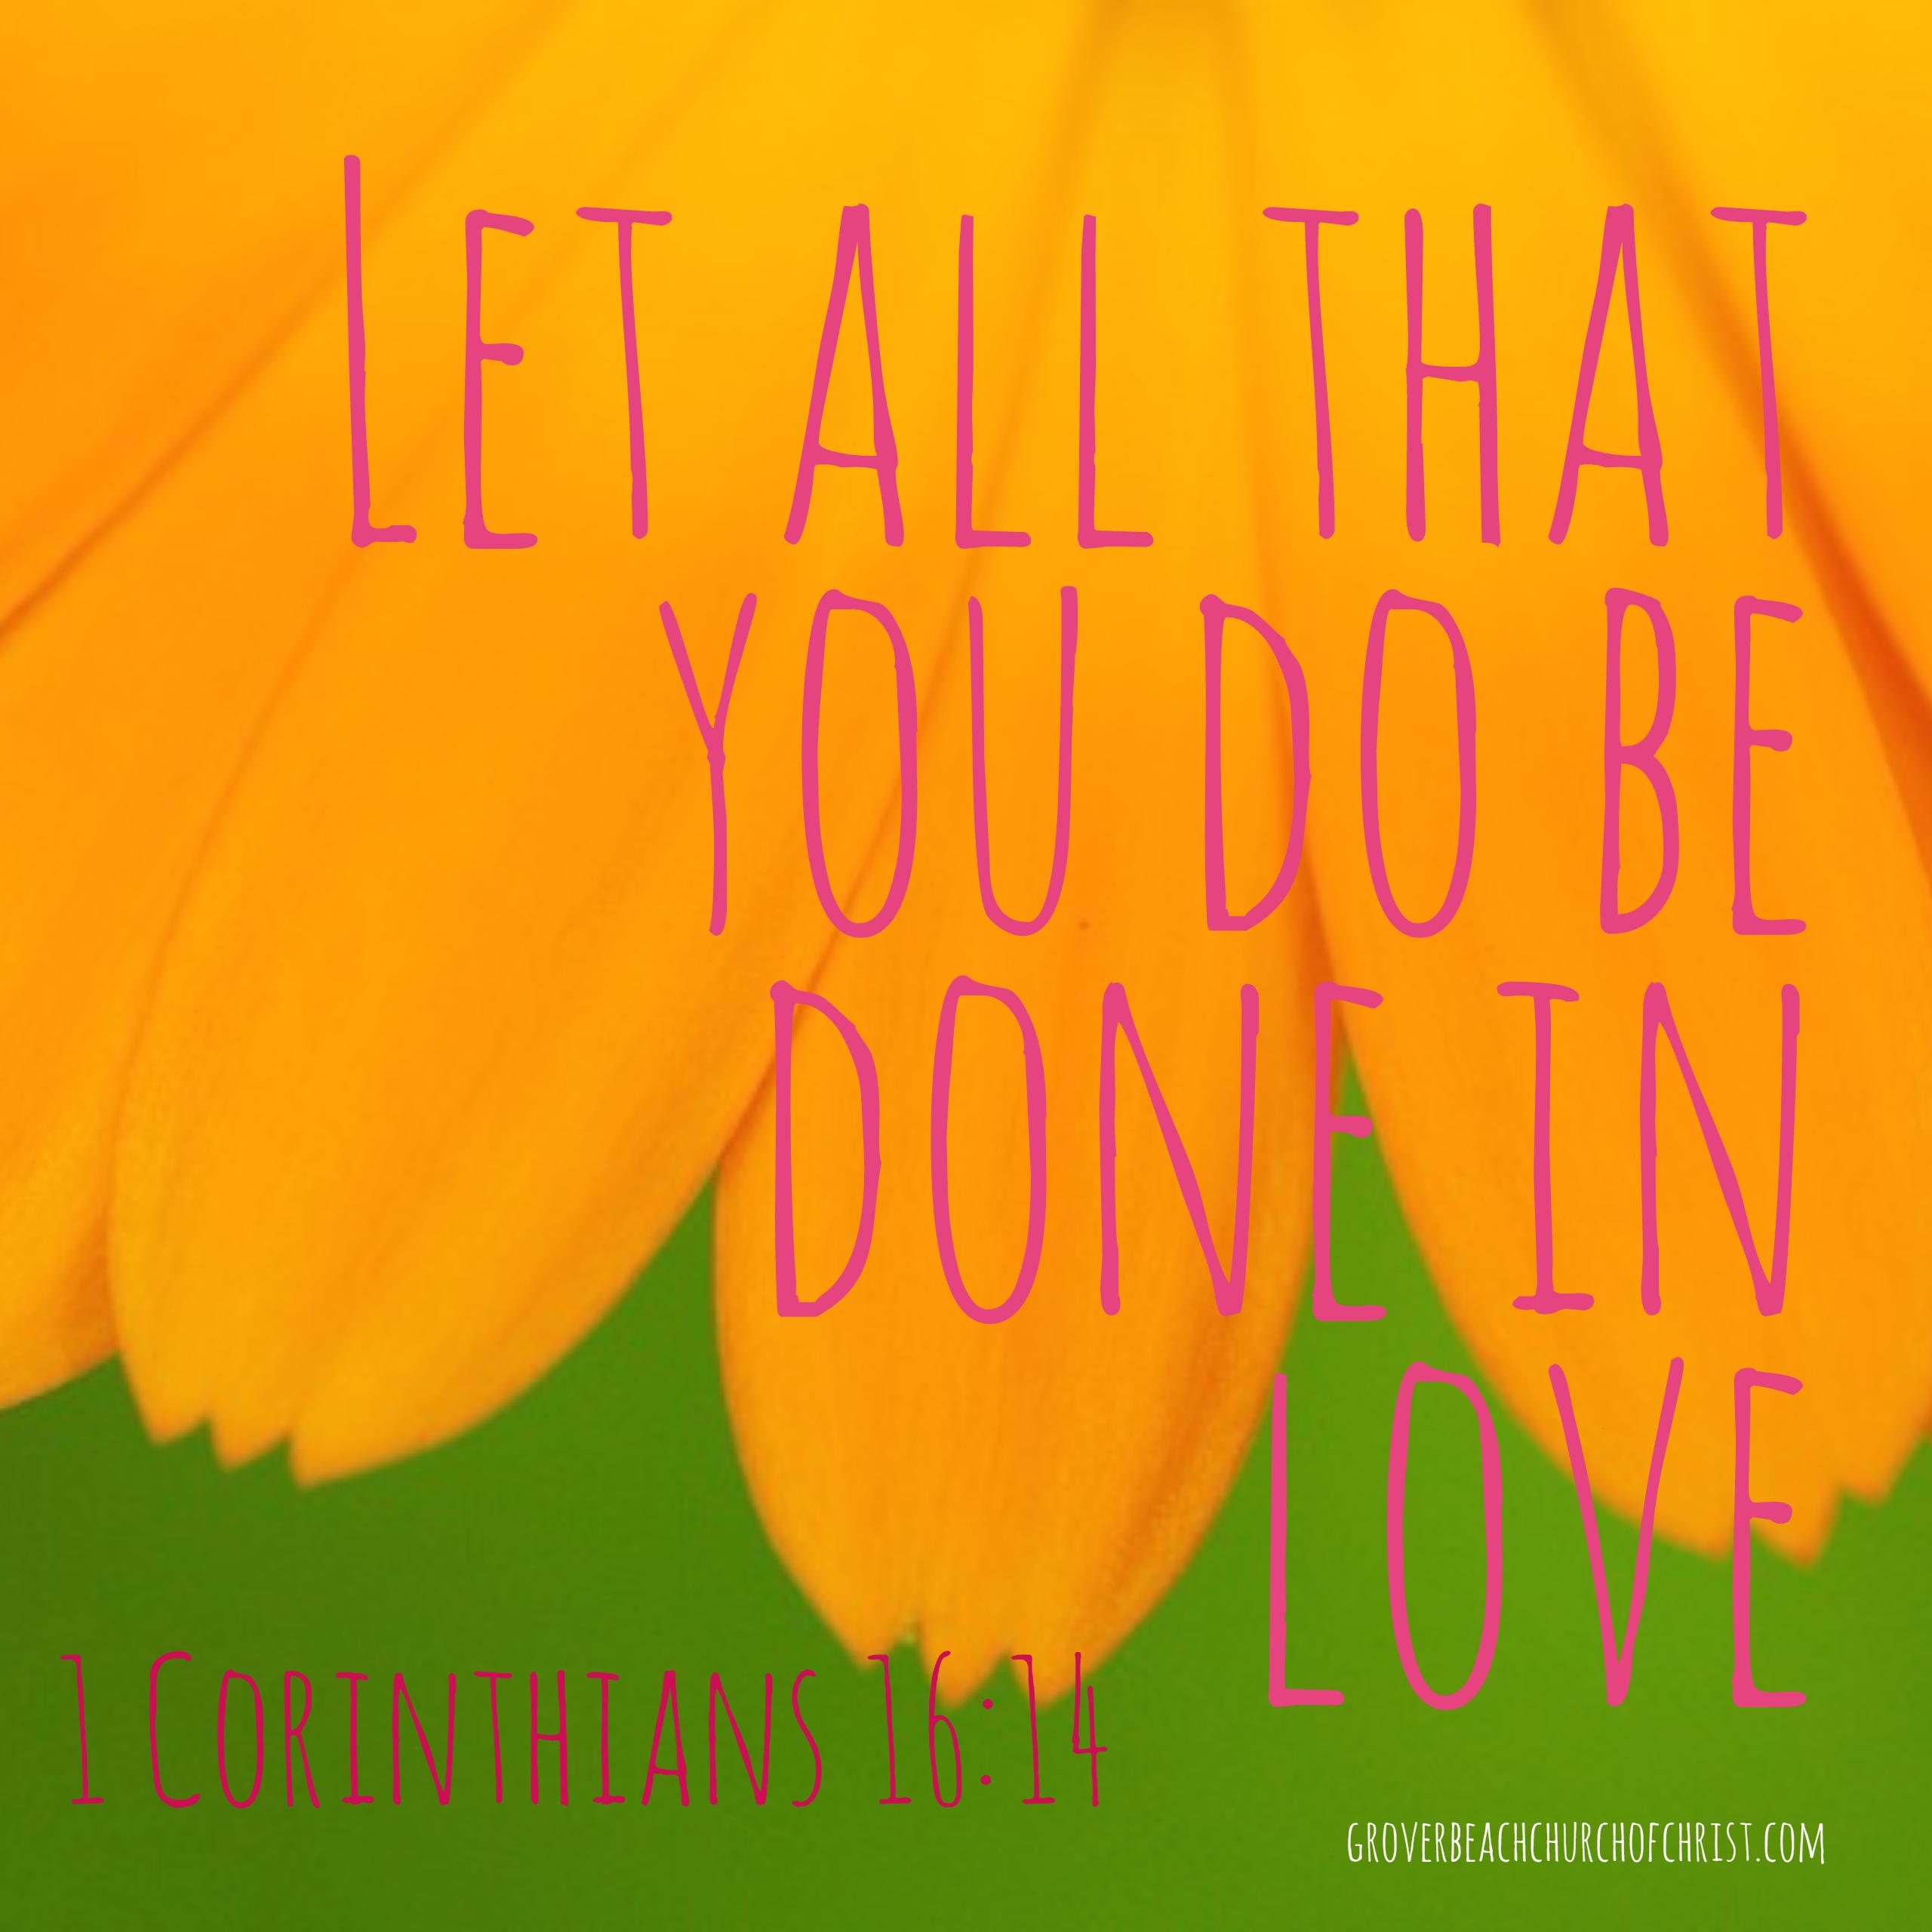 1 Corinthians 16:14 Let all that you do be